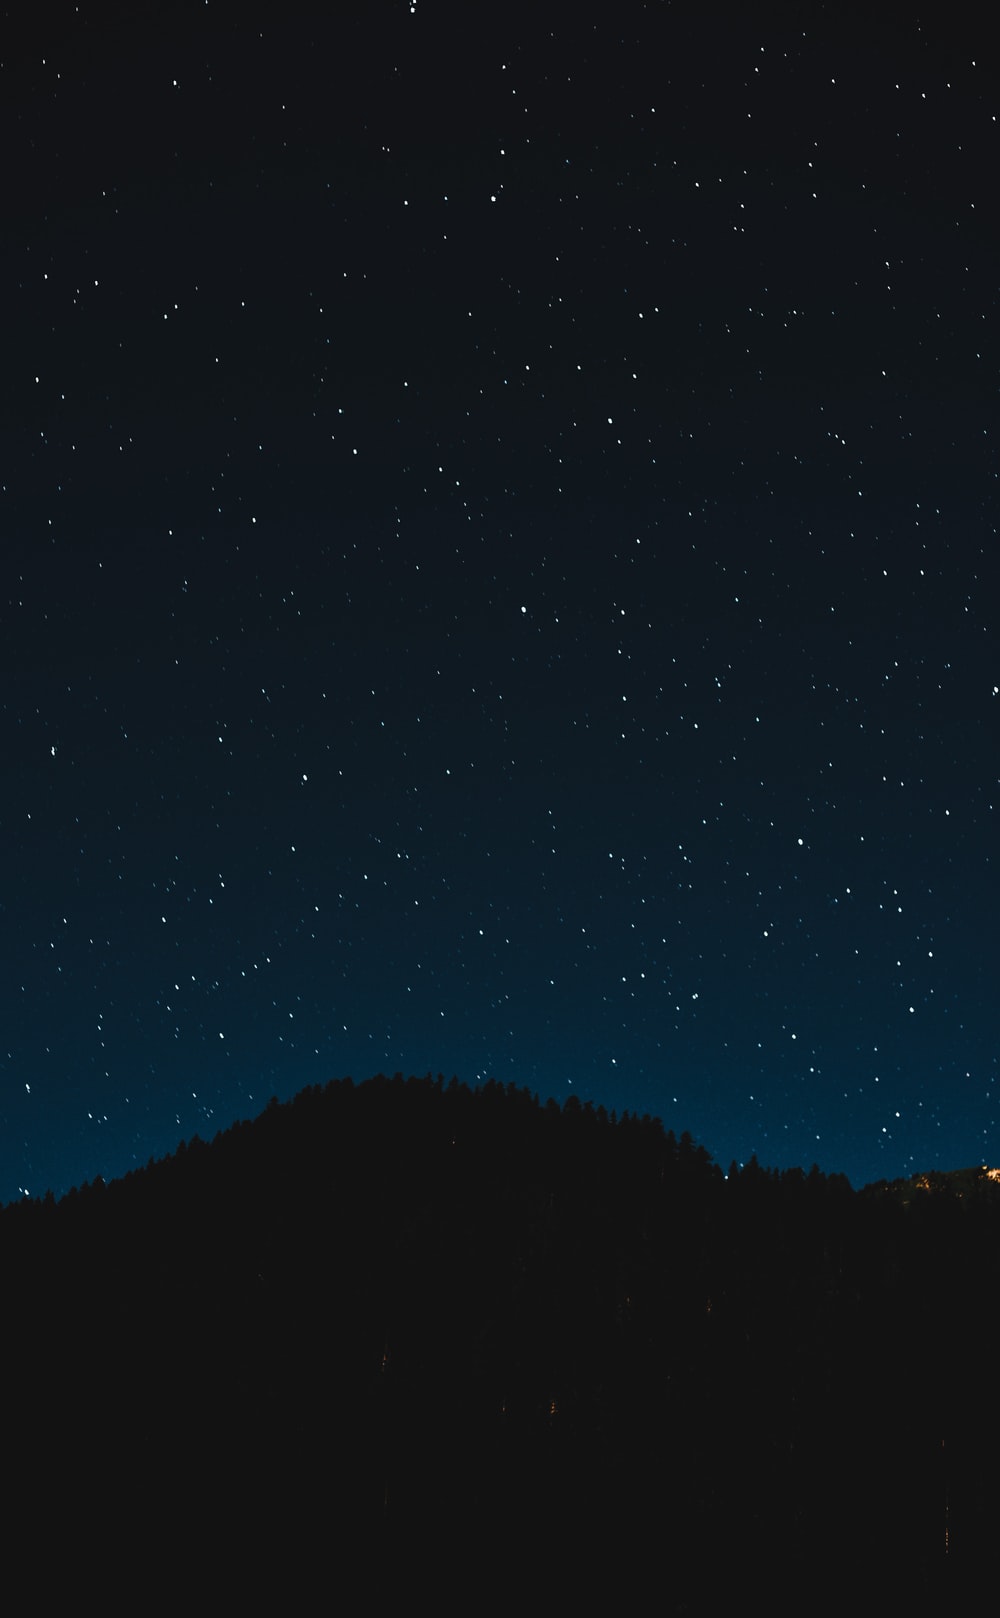 Starry Sky Picture [HD]. Download Free Image